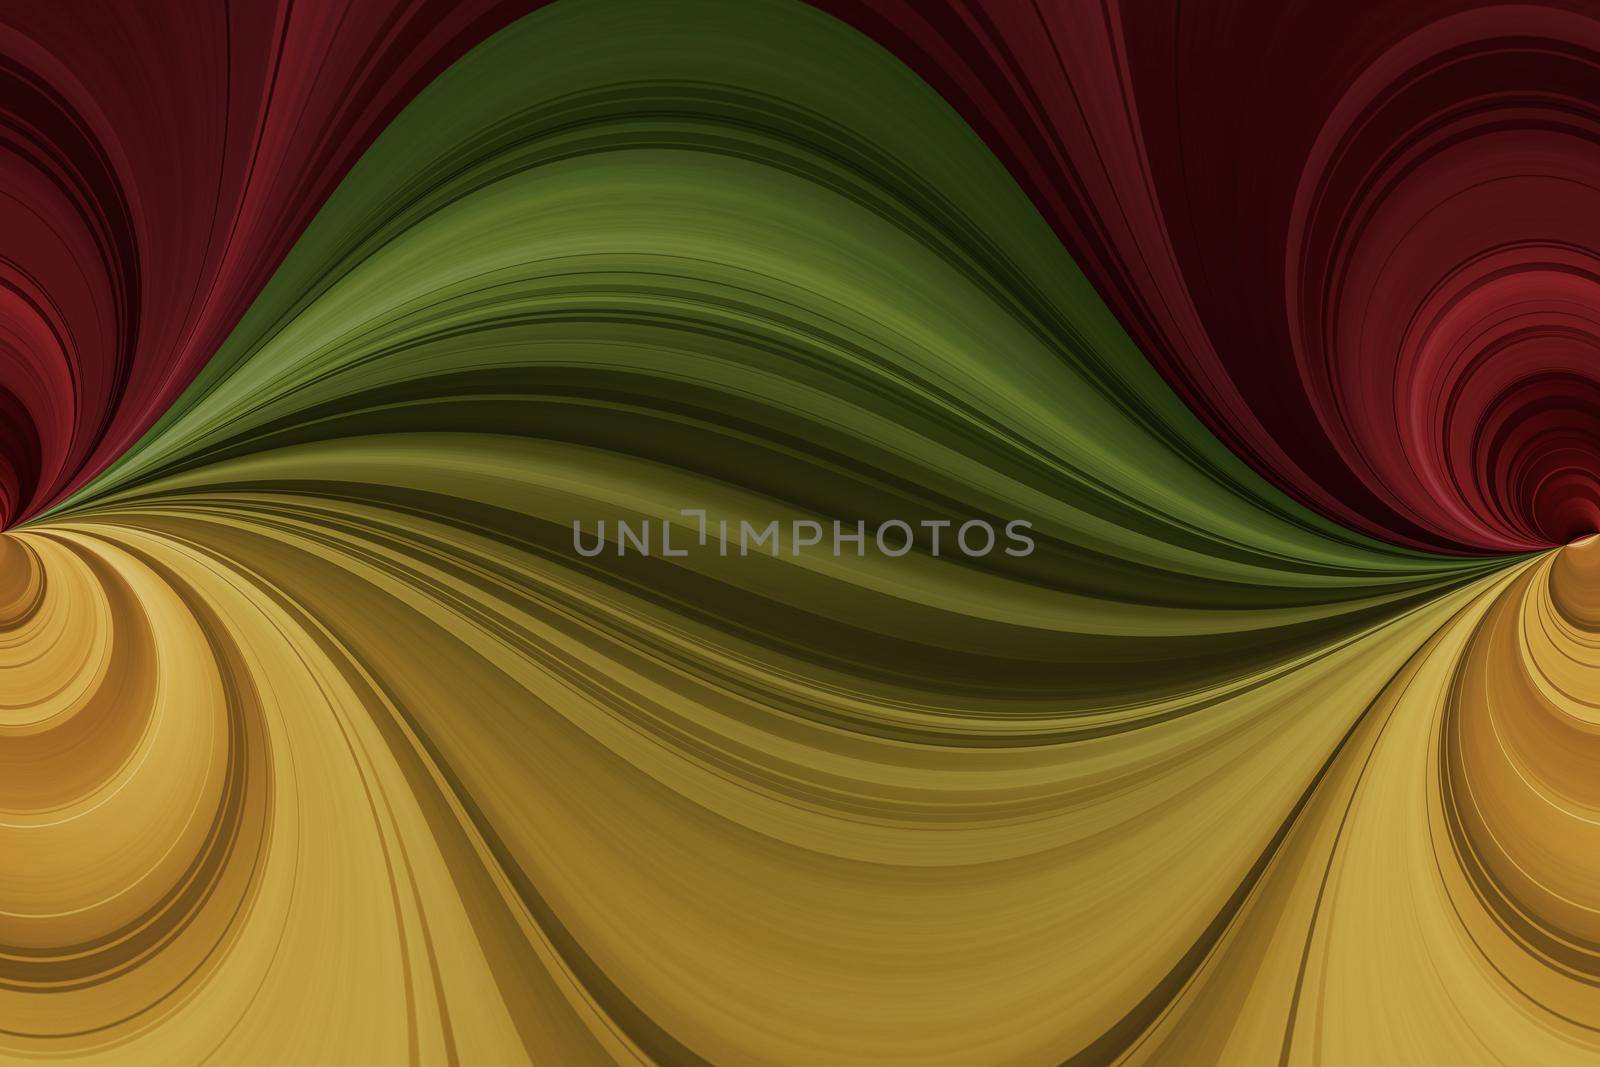 Red, green and yellow horizontal curved lines, abstract background, seamless pattern